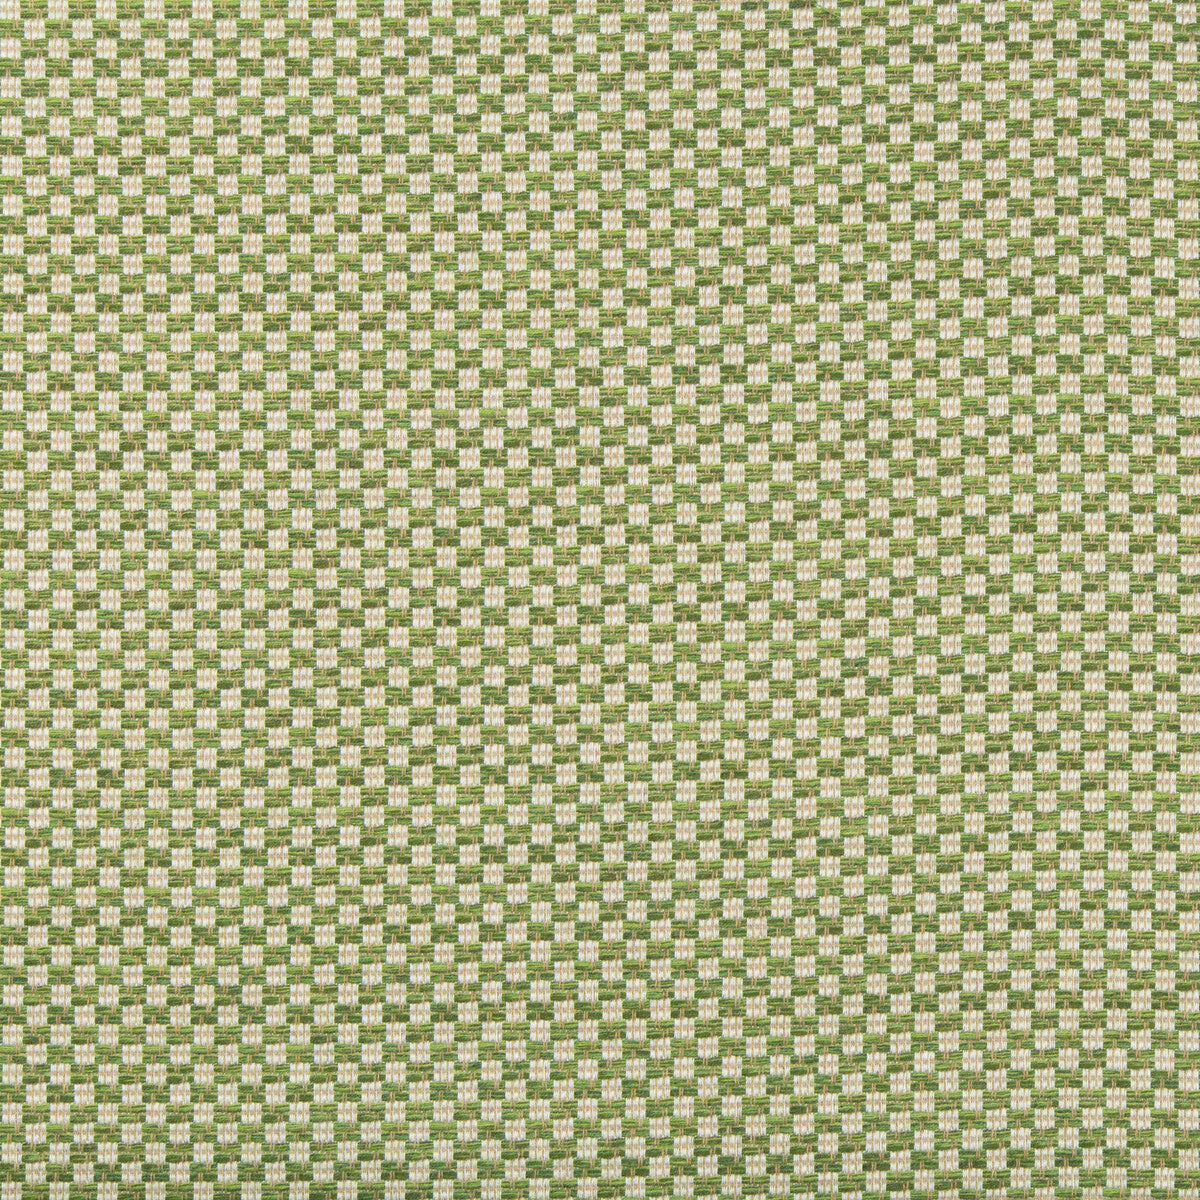 Alturas fabric in leaf color - pattern 2018109.3.0 - by Lee Jofa in the Gresham Textures collection